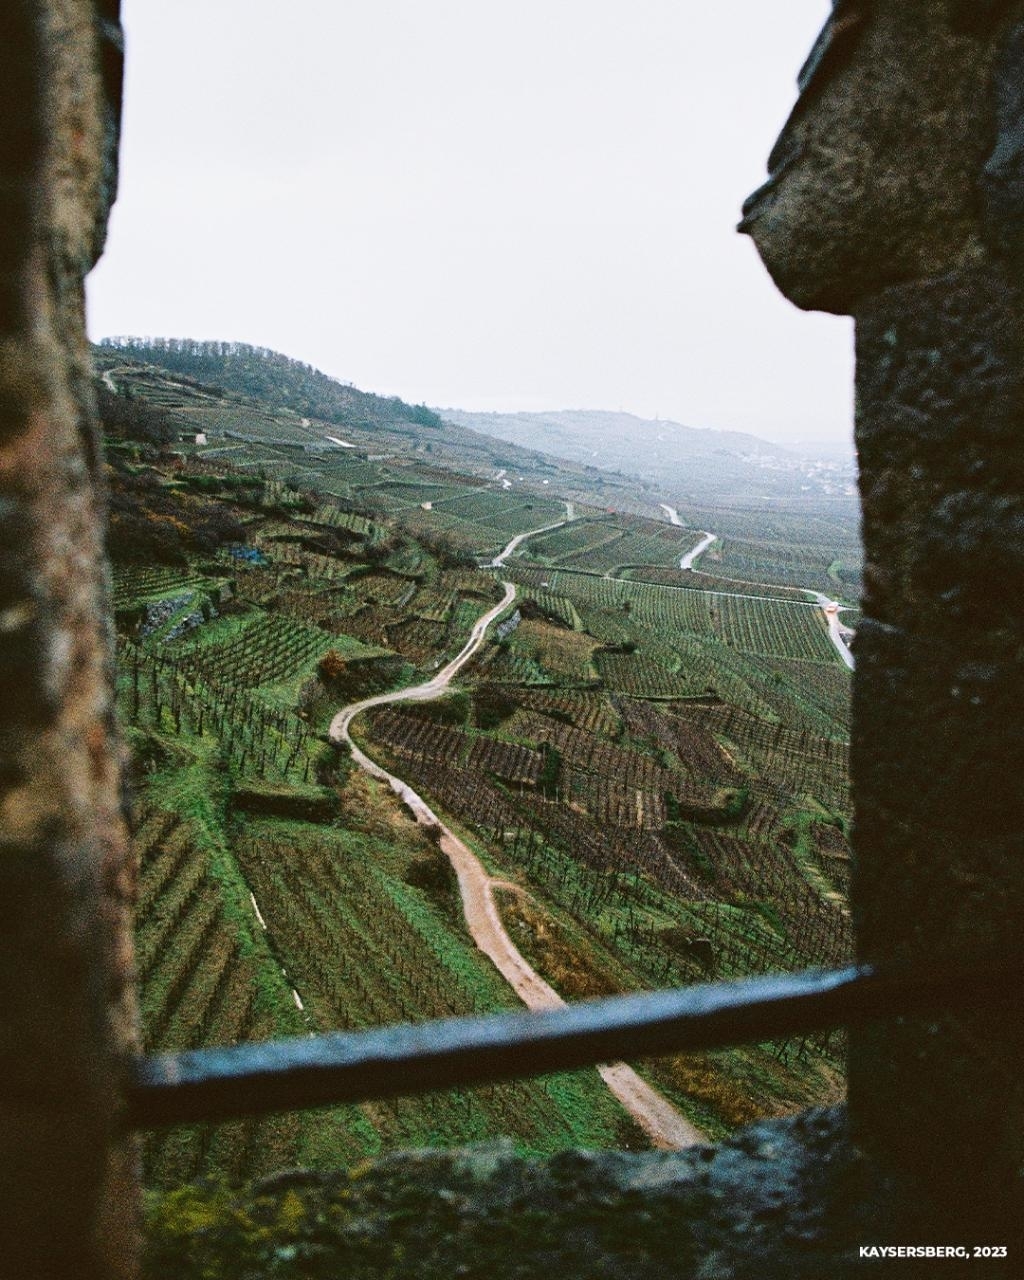 View from a stone window overlooking a winding path through vineyards